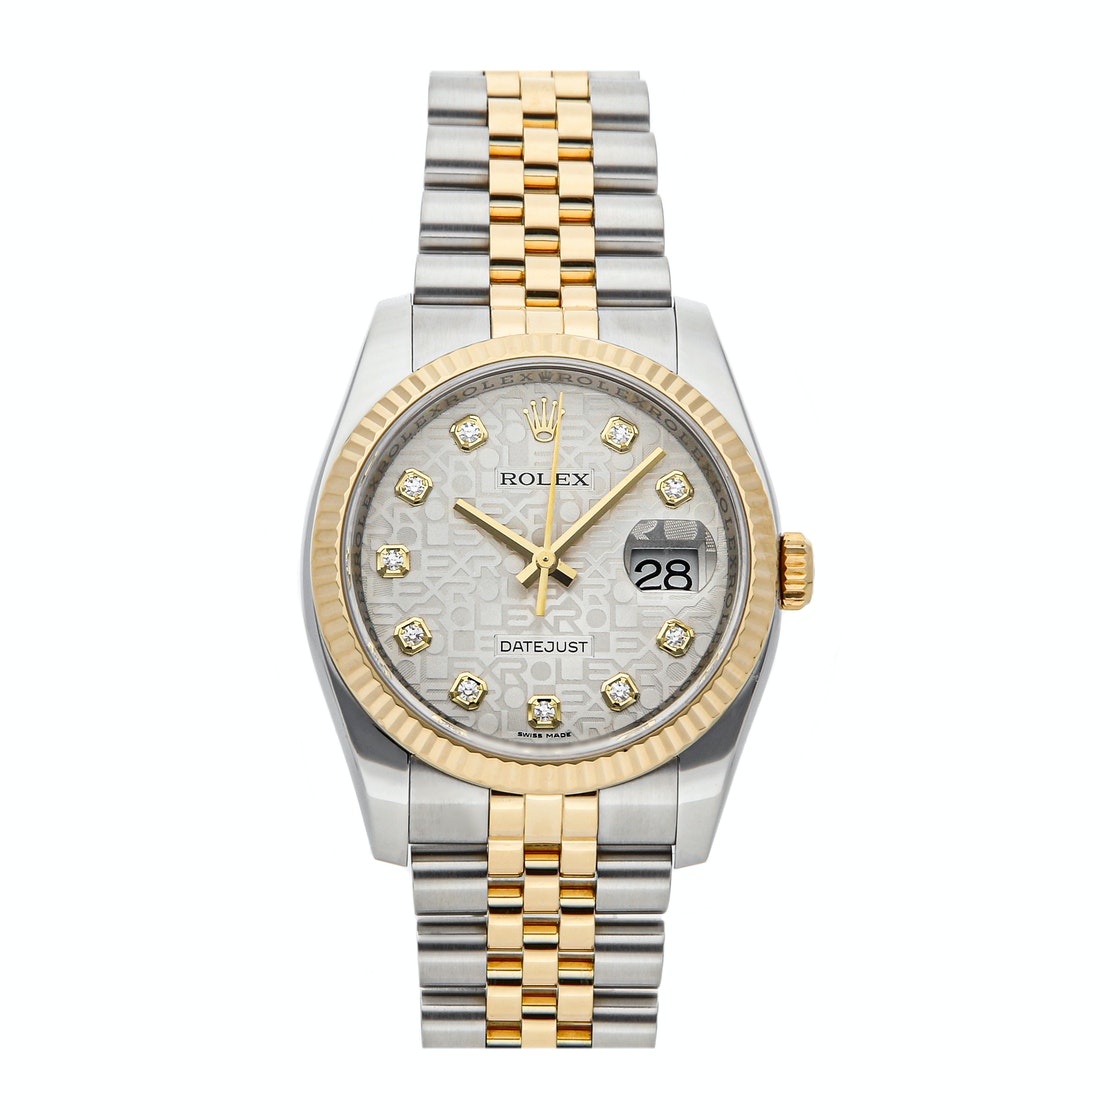 Pre-owned Rolex Silver Diamonds 18k Yellow Gold And Stainless Steel Datejust 116233 Men's Wristwatch 36 Mm